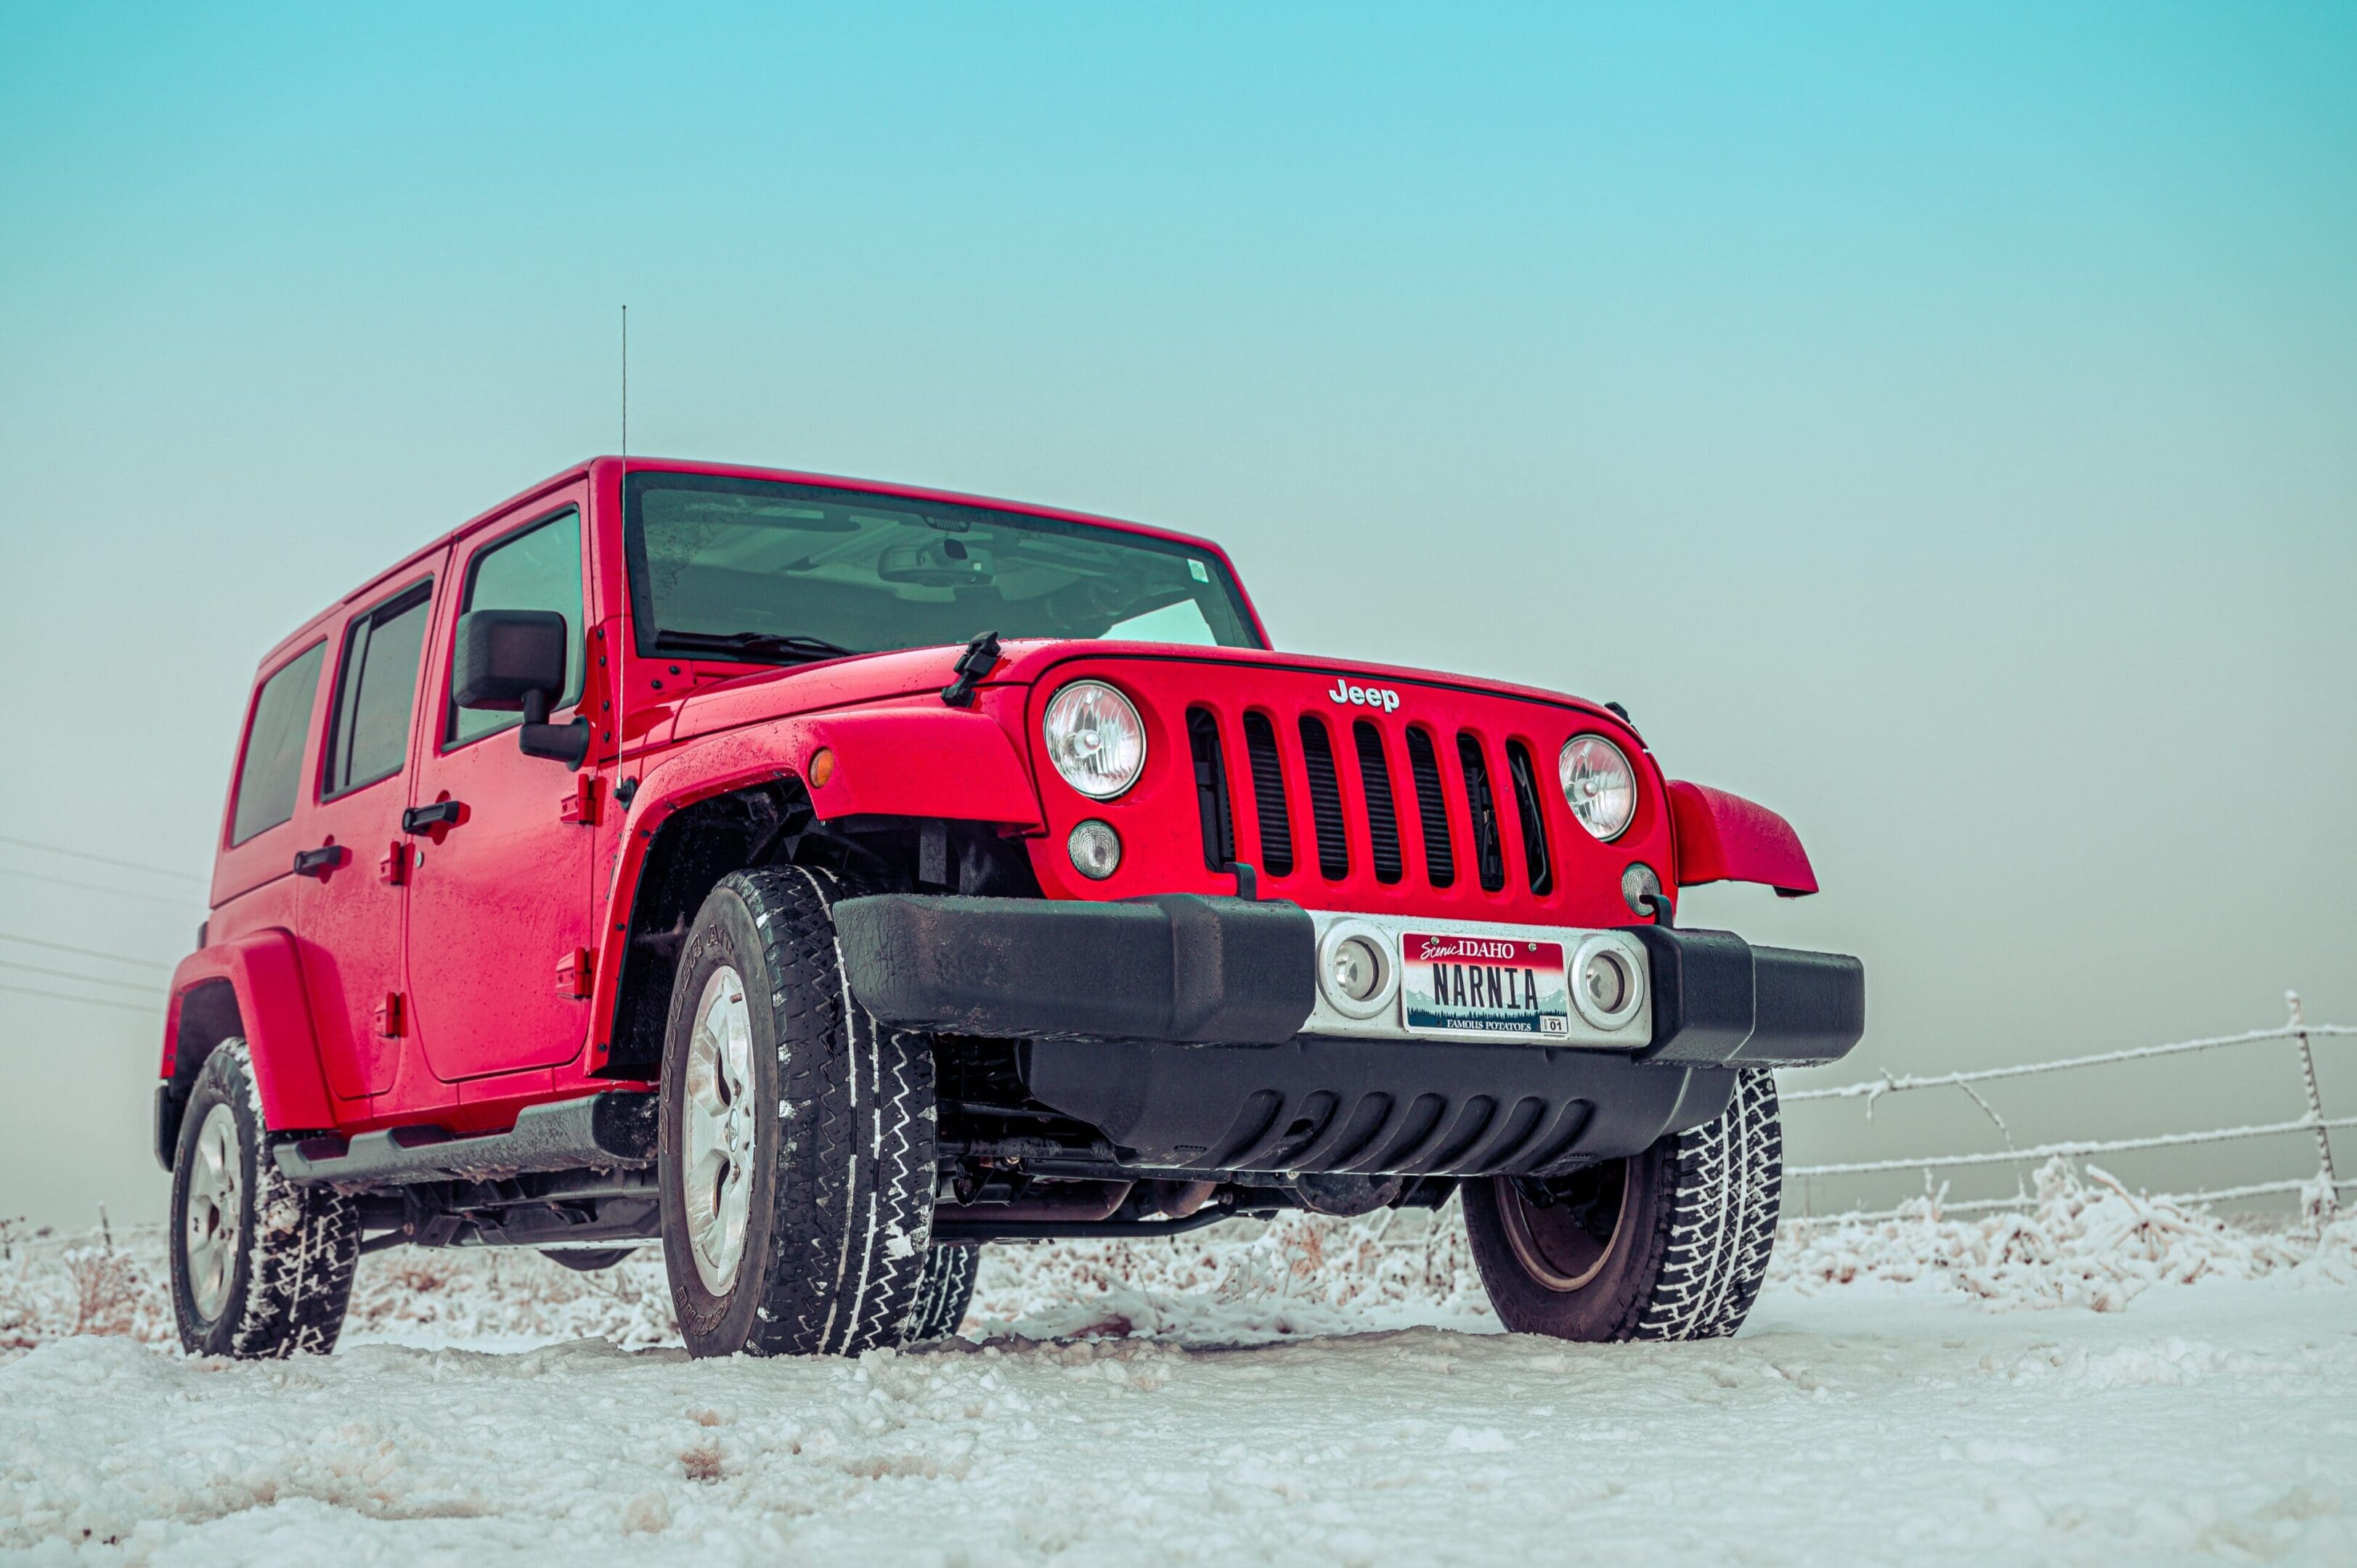 A red jeep is parked in the snow.